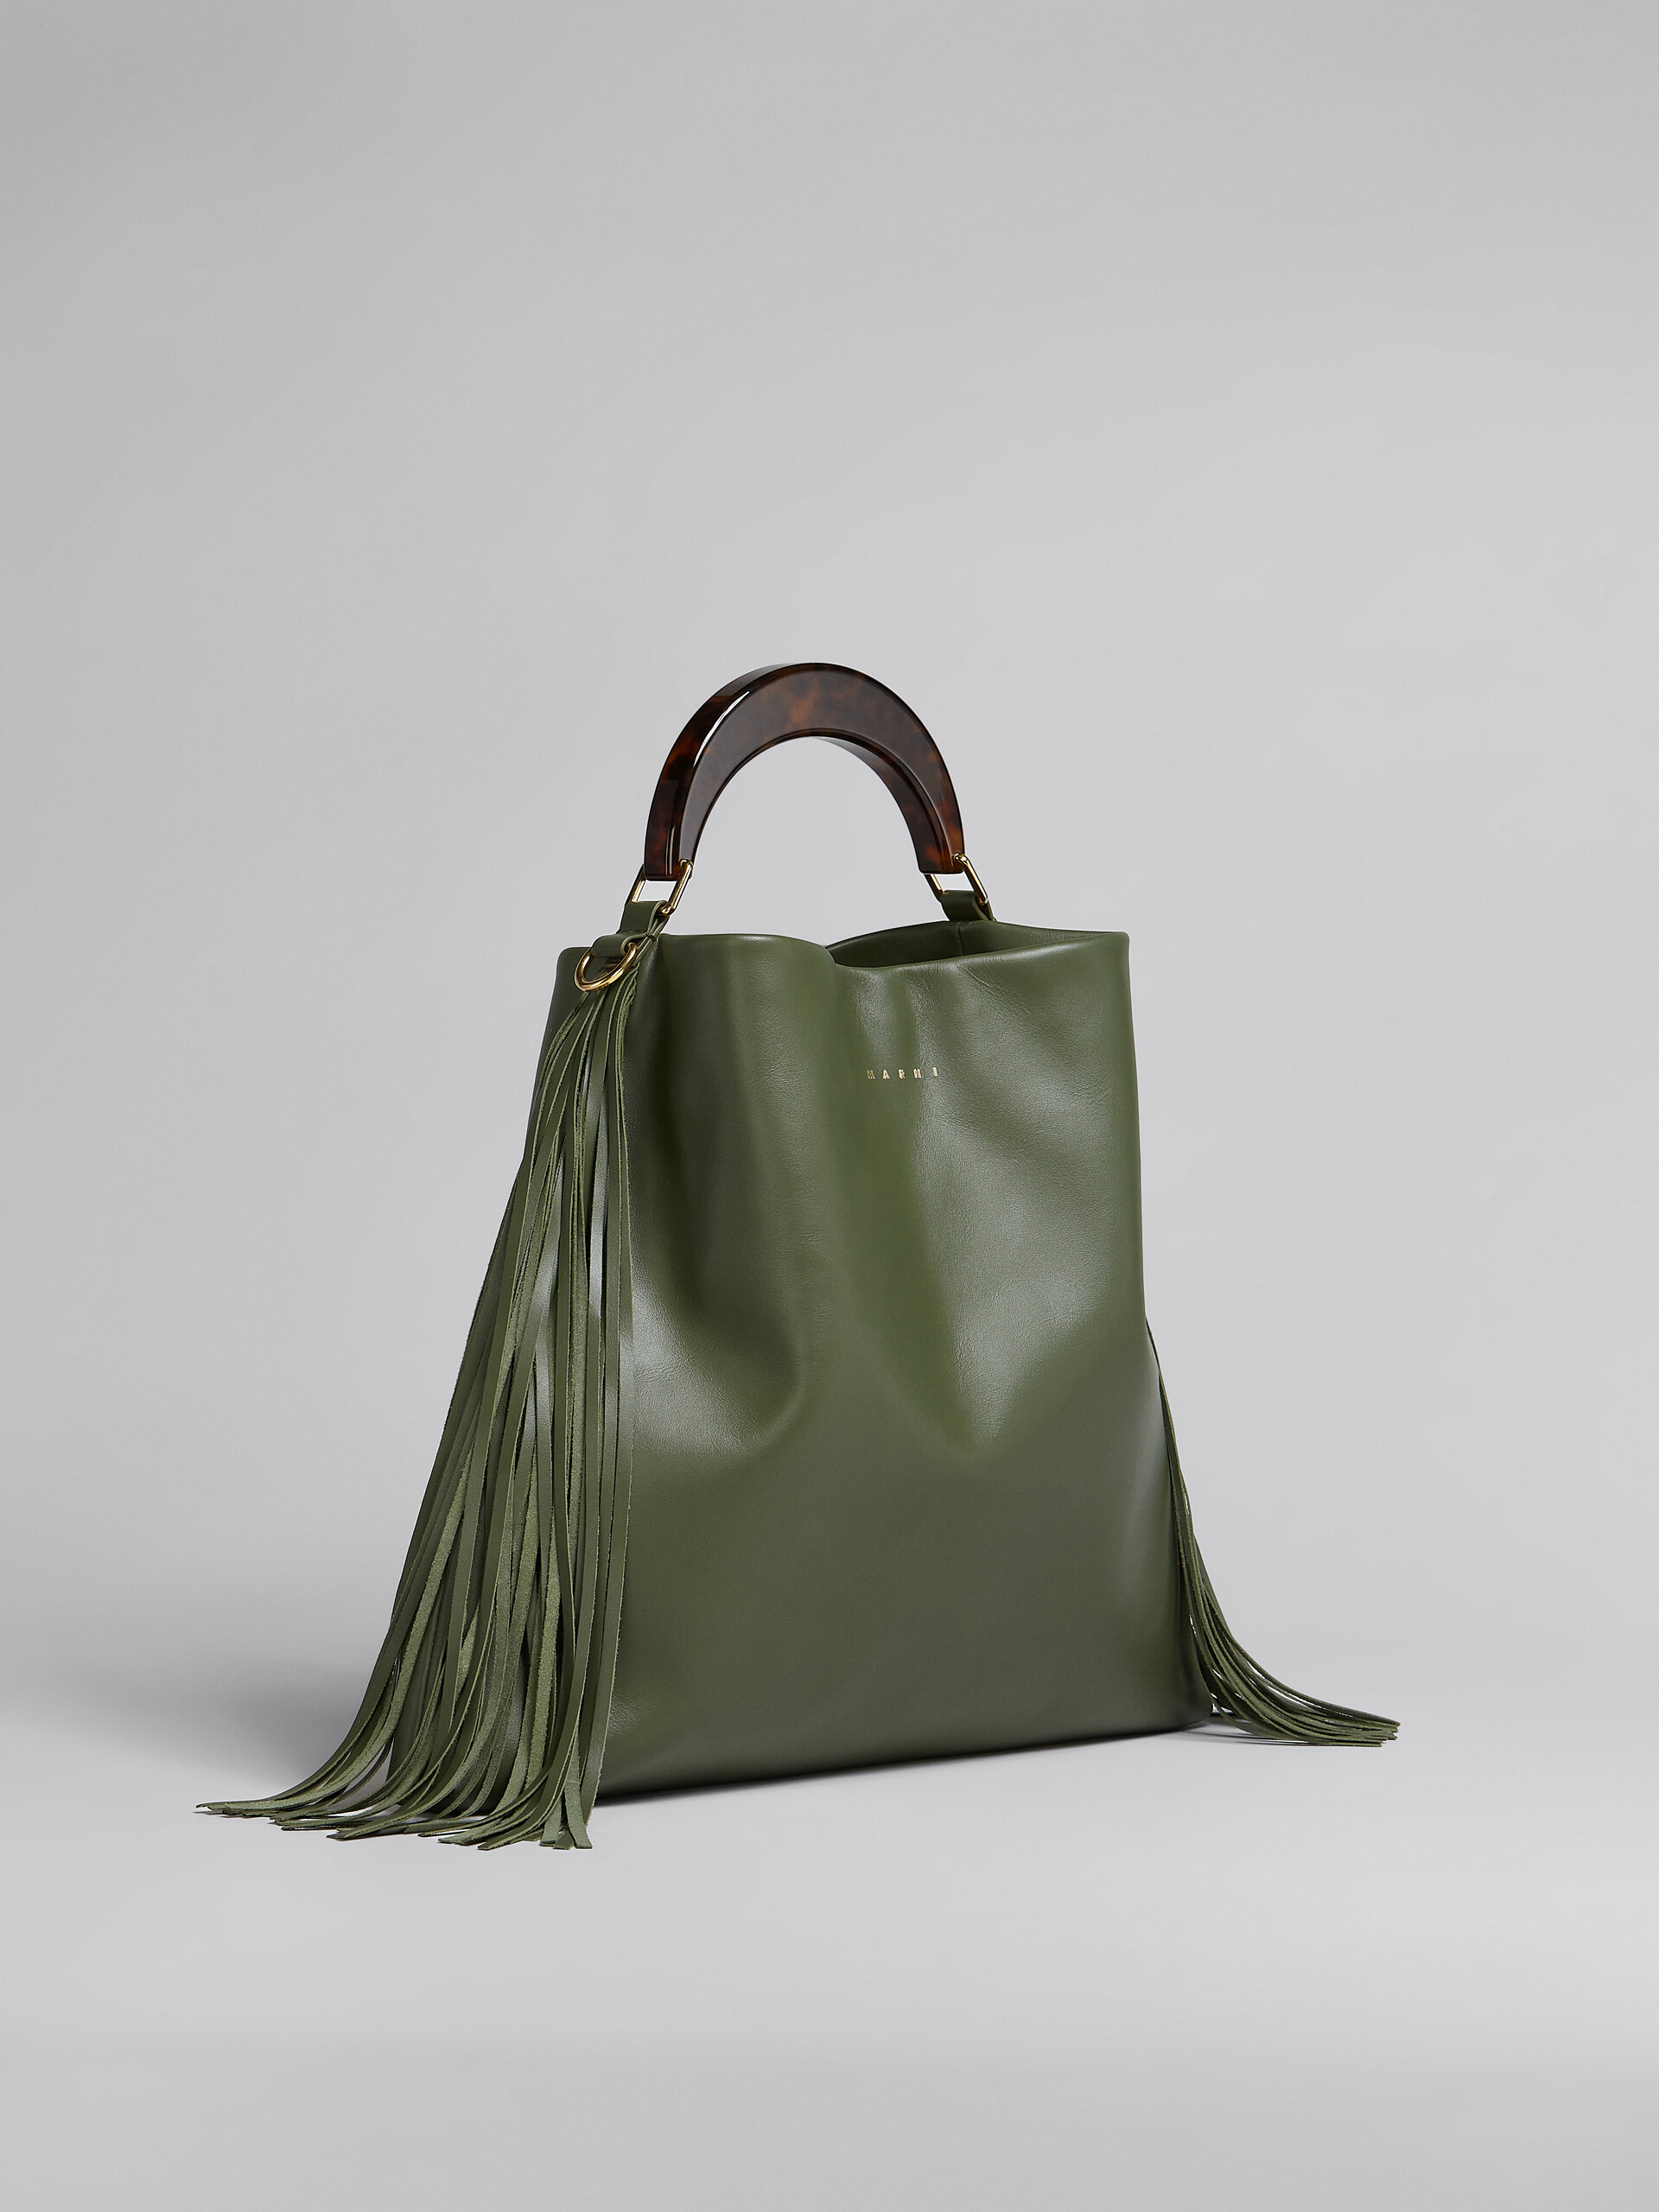 Venice Medium Bag in green leather with fringes - Shoulder Bags - Image 6